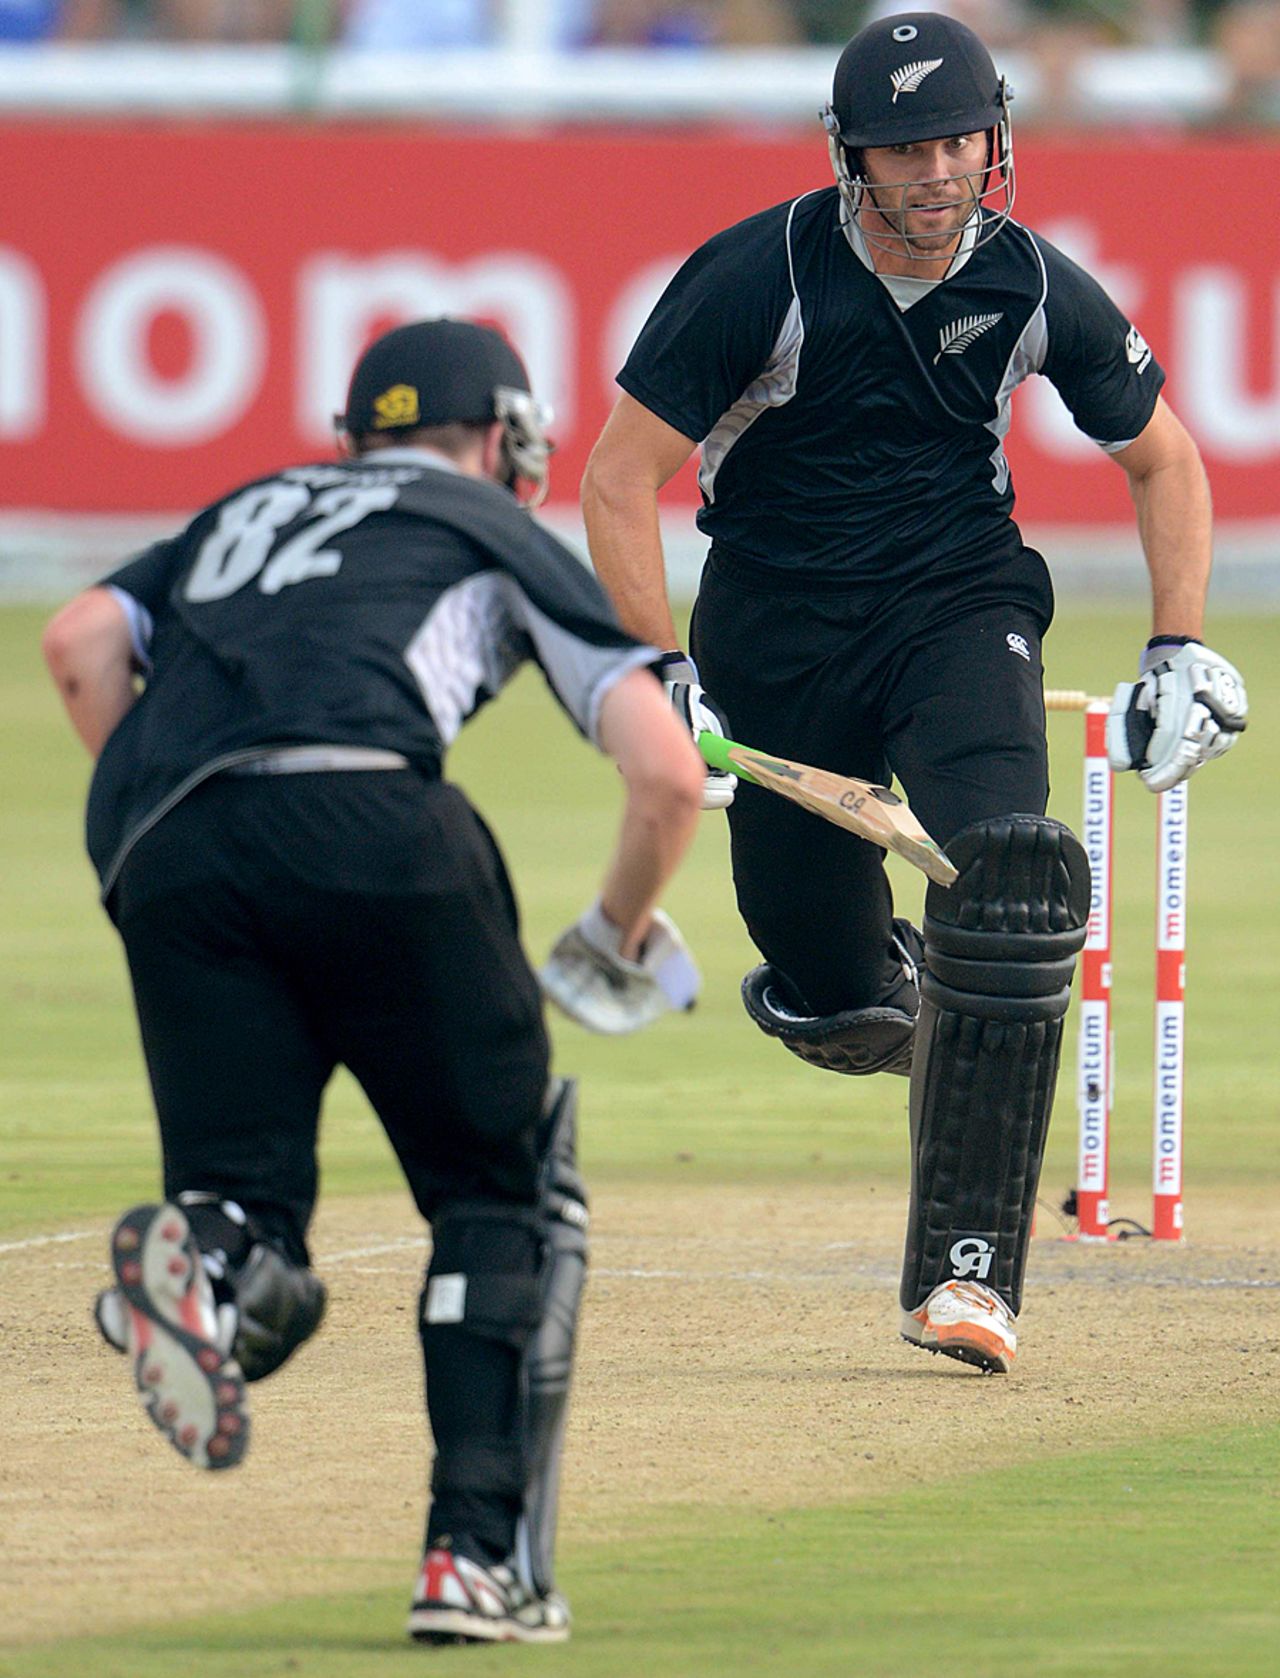 James Franklin led New Zealand's charge towards the end with an unbeaten 53, South Africa v New Zealand, 3rd ODI, Potchefstroom